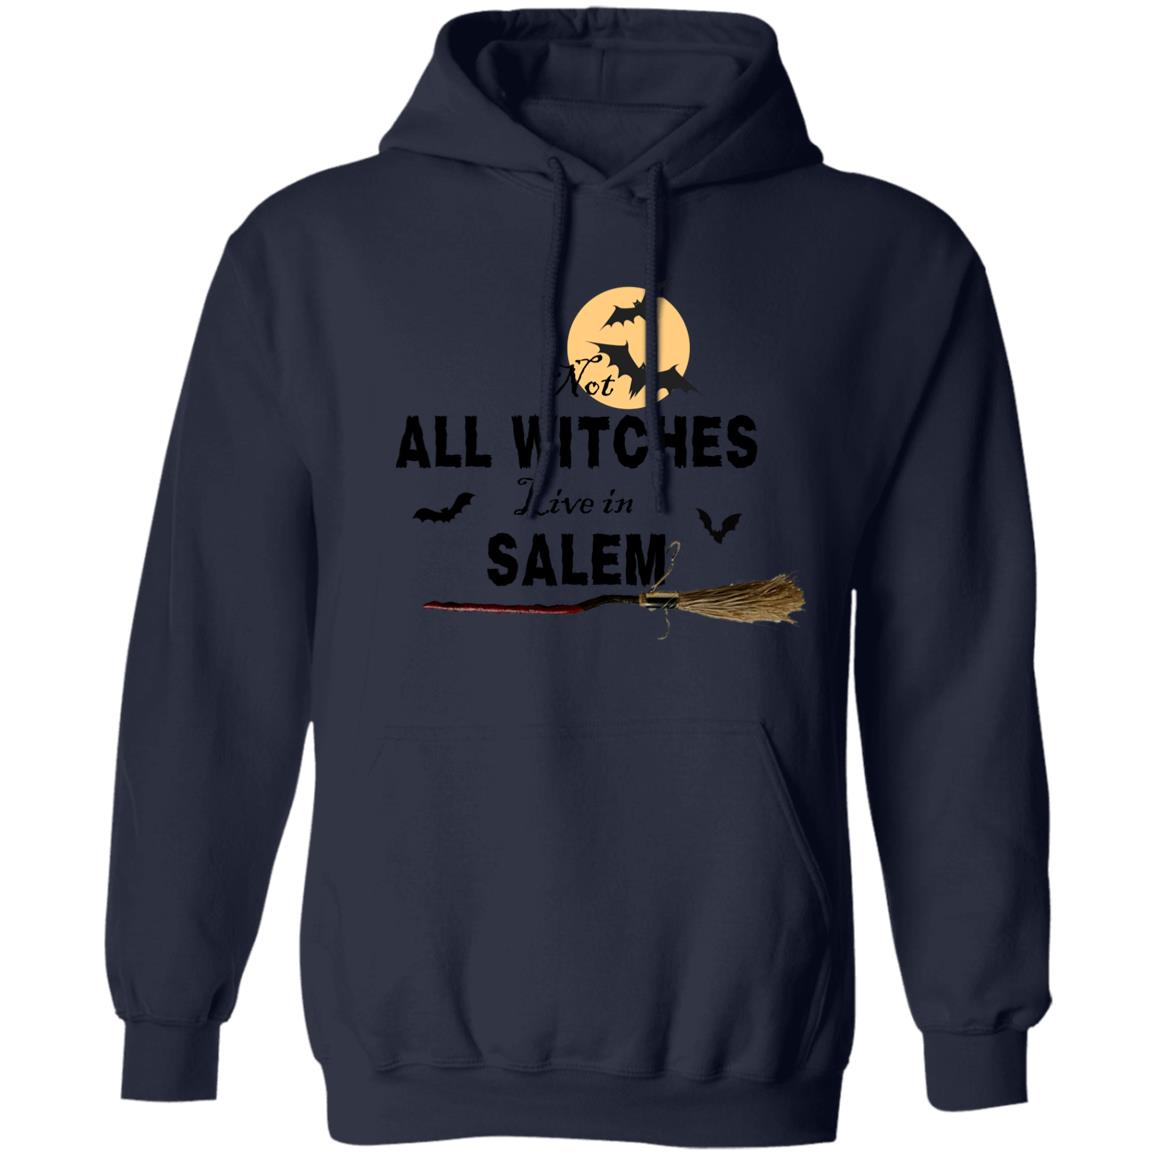 Not ALL WITCHES Live in SALEM Not All Witches Live In Salem Hoodie Sweatshirt